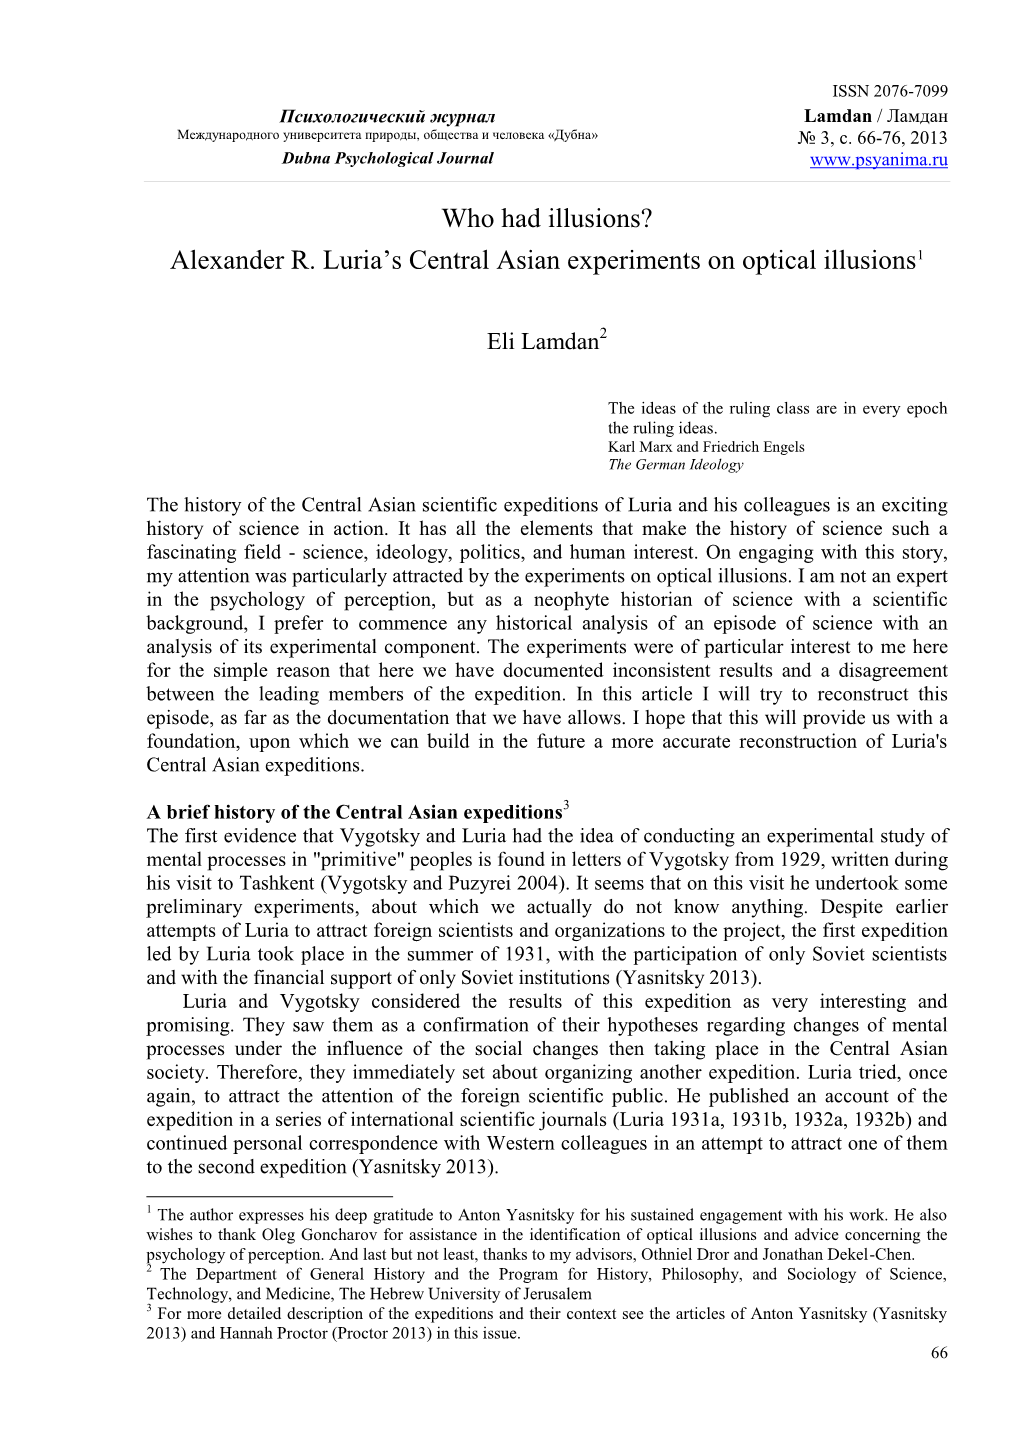 Alexander R. Luria's Central Asian Experiments on Optical Illusions